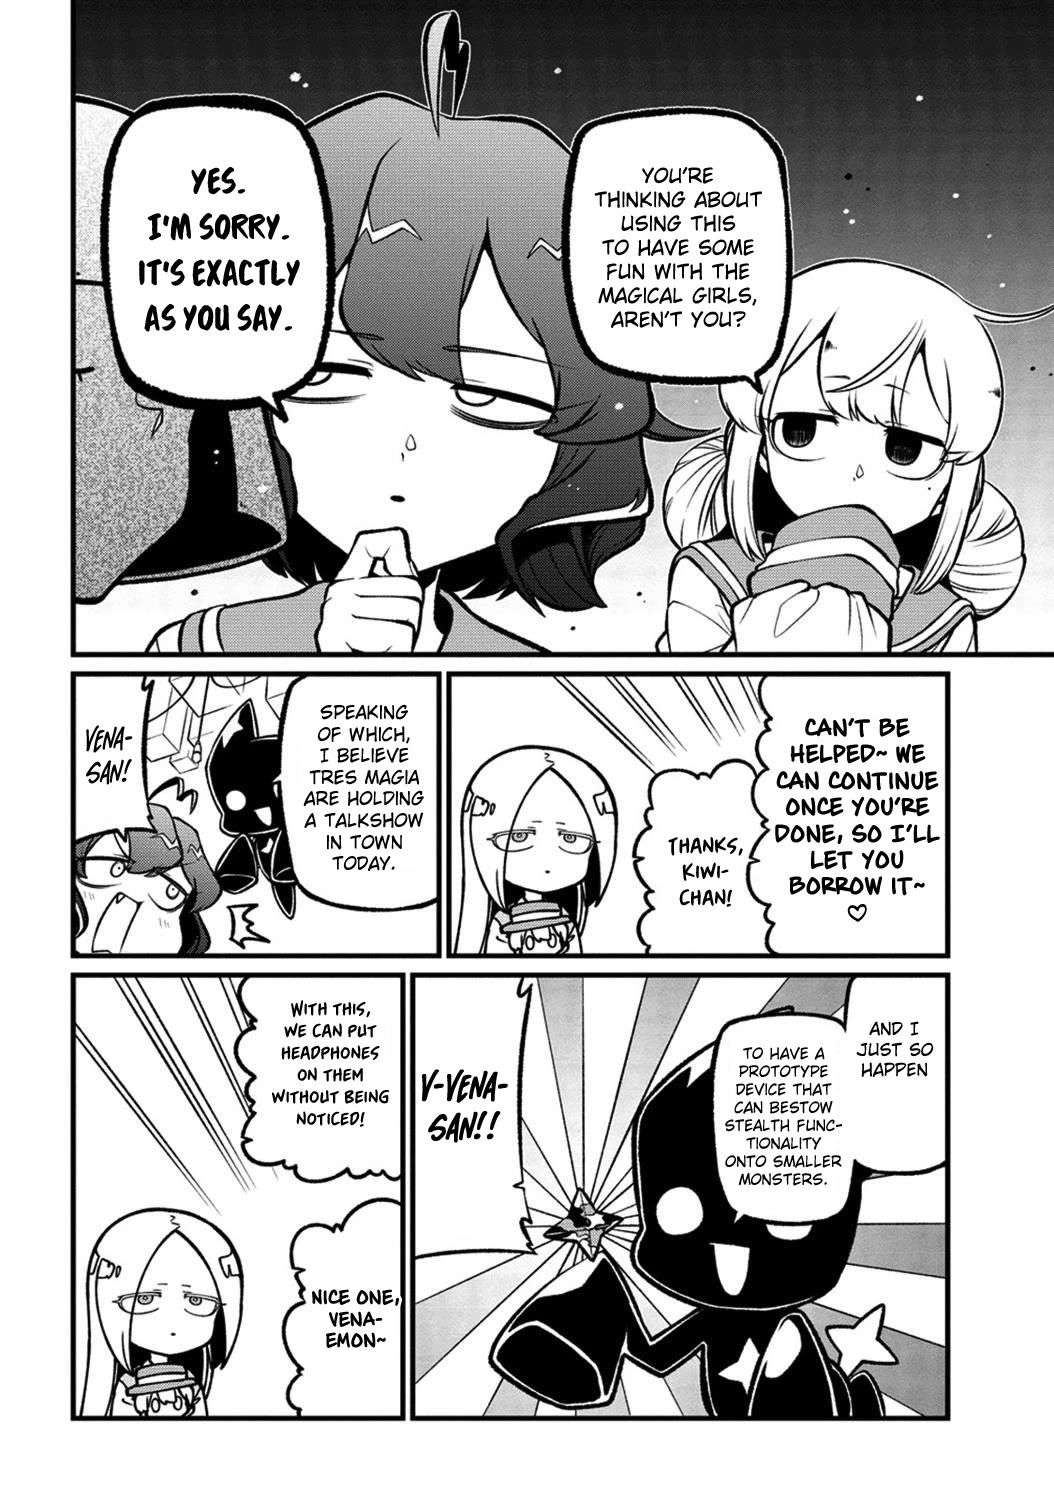 Gushing over Magical Girls - chapter 57 - #6